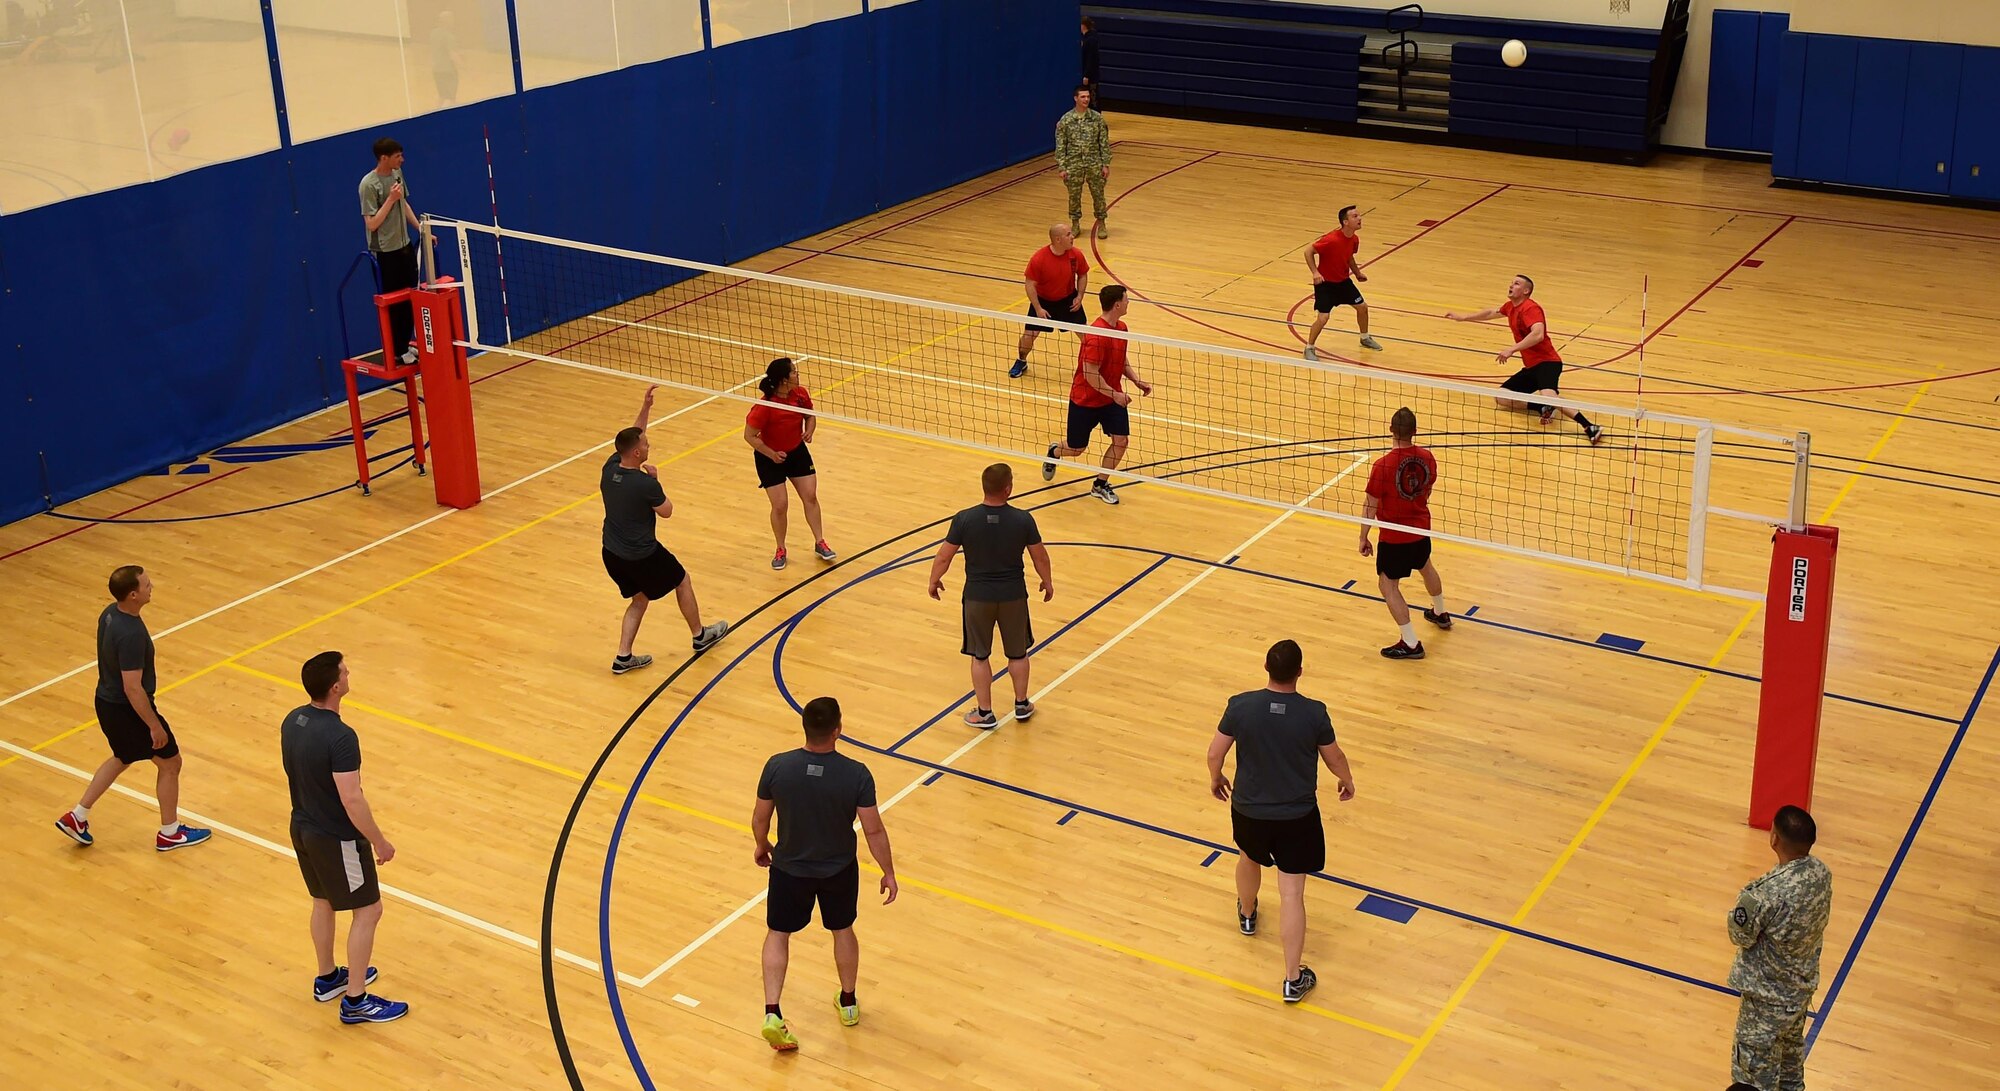 Members of the 743d Military Intelligence Battalion compete in an annual volleyball tournament April 28, 2016, at the Buckley Fitness Center on Buckley Air Force Base, Colo. Held over a two-day period, the tournament involved three teams and encouraged friendly inter-battalion competition. (U.S. Air Force photo by Airman 1st Class Gabrielle Spradling/Released)